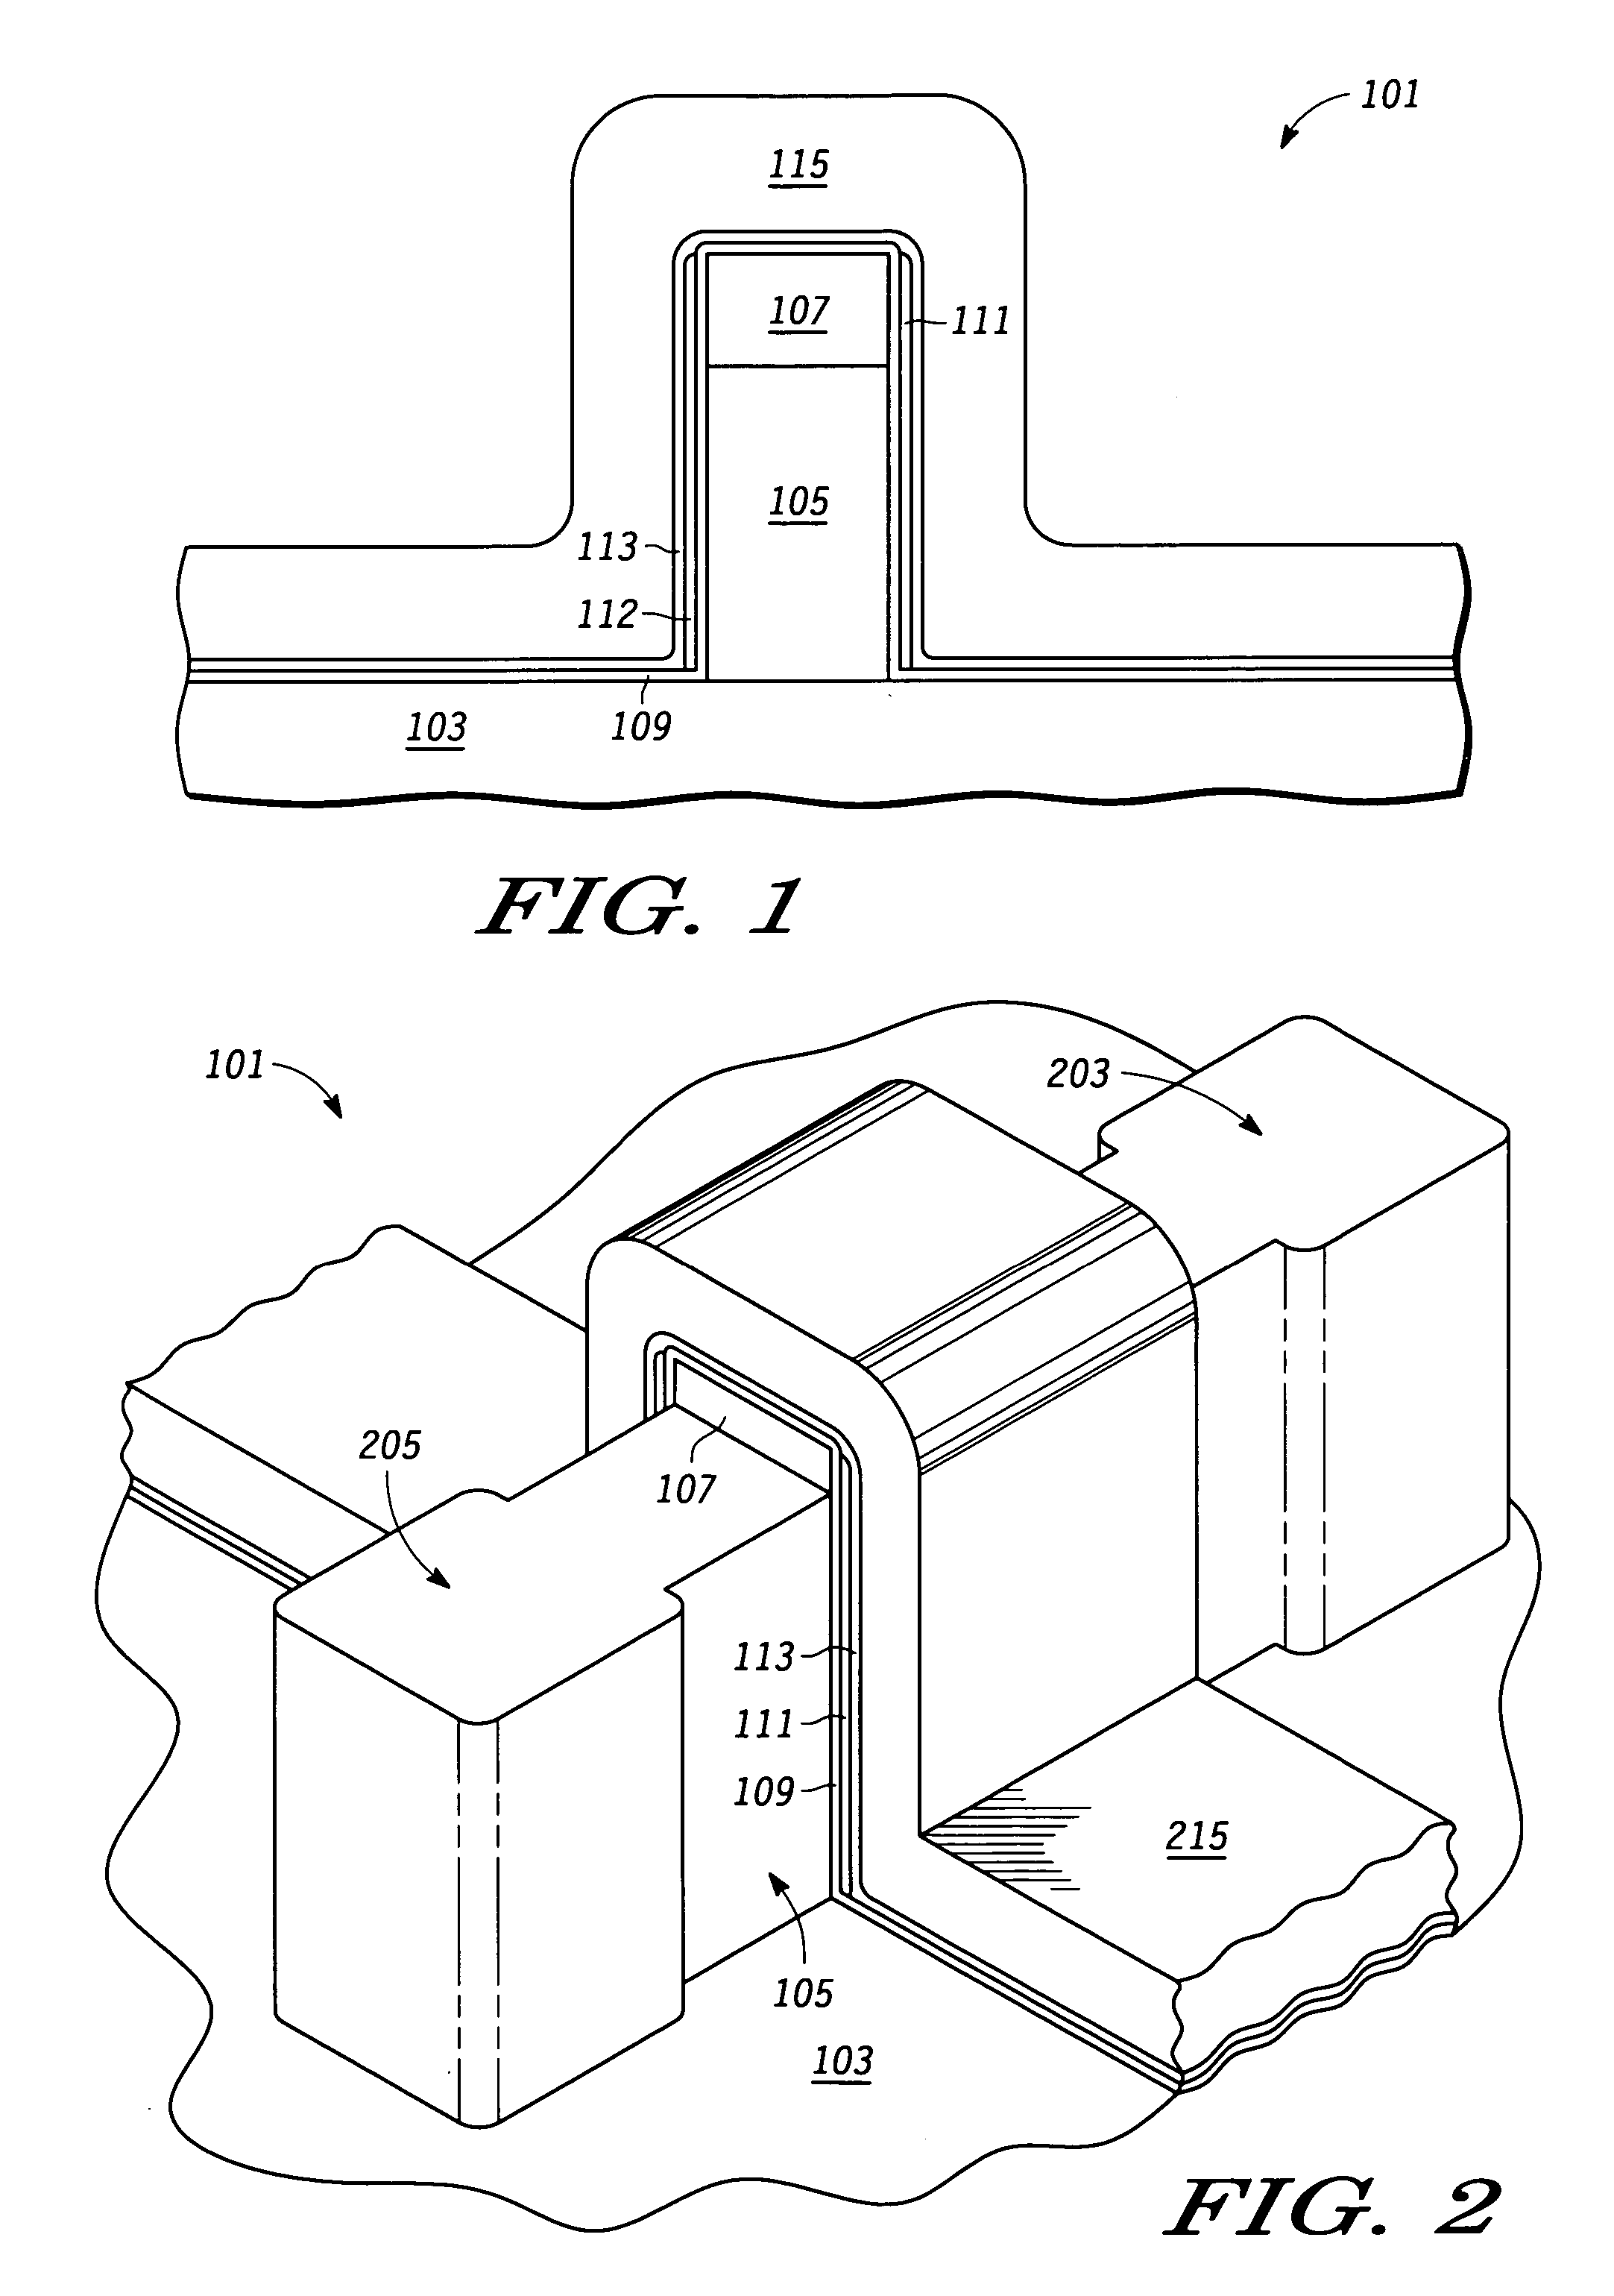 Charge storage structure formation in transistor with vertical channel region